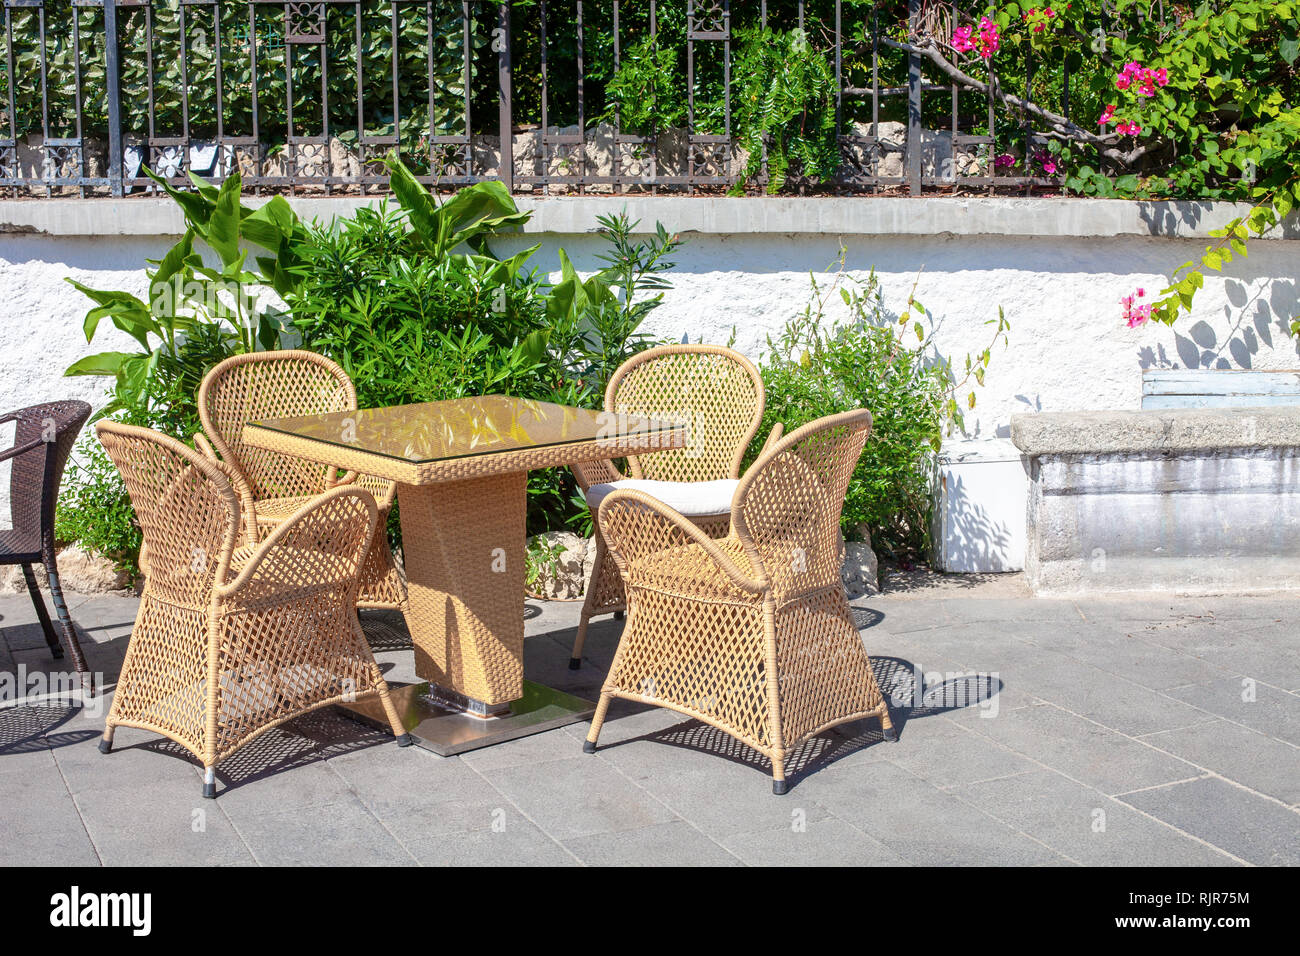 Page 2 - Wicker Furniture High Resolution Stock Photography and Images -  Alamy